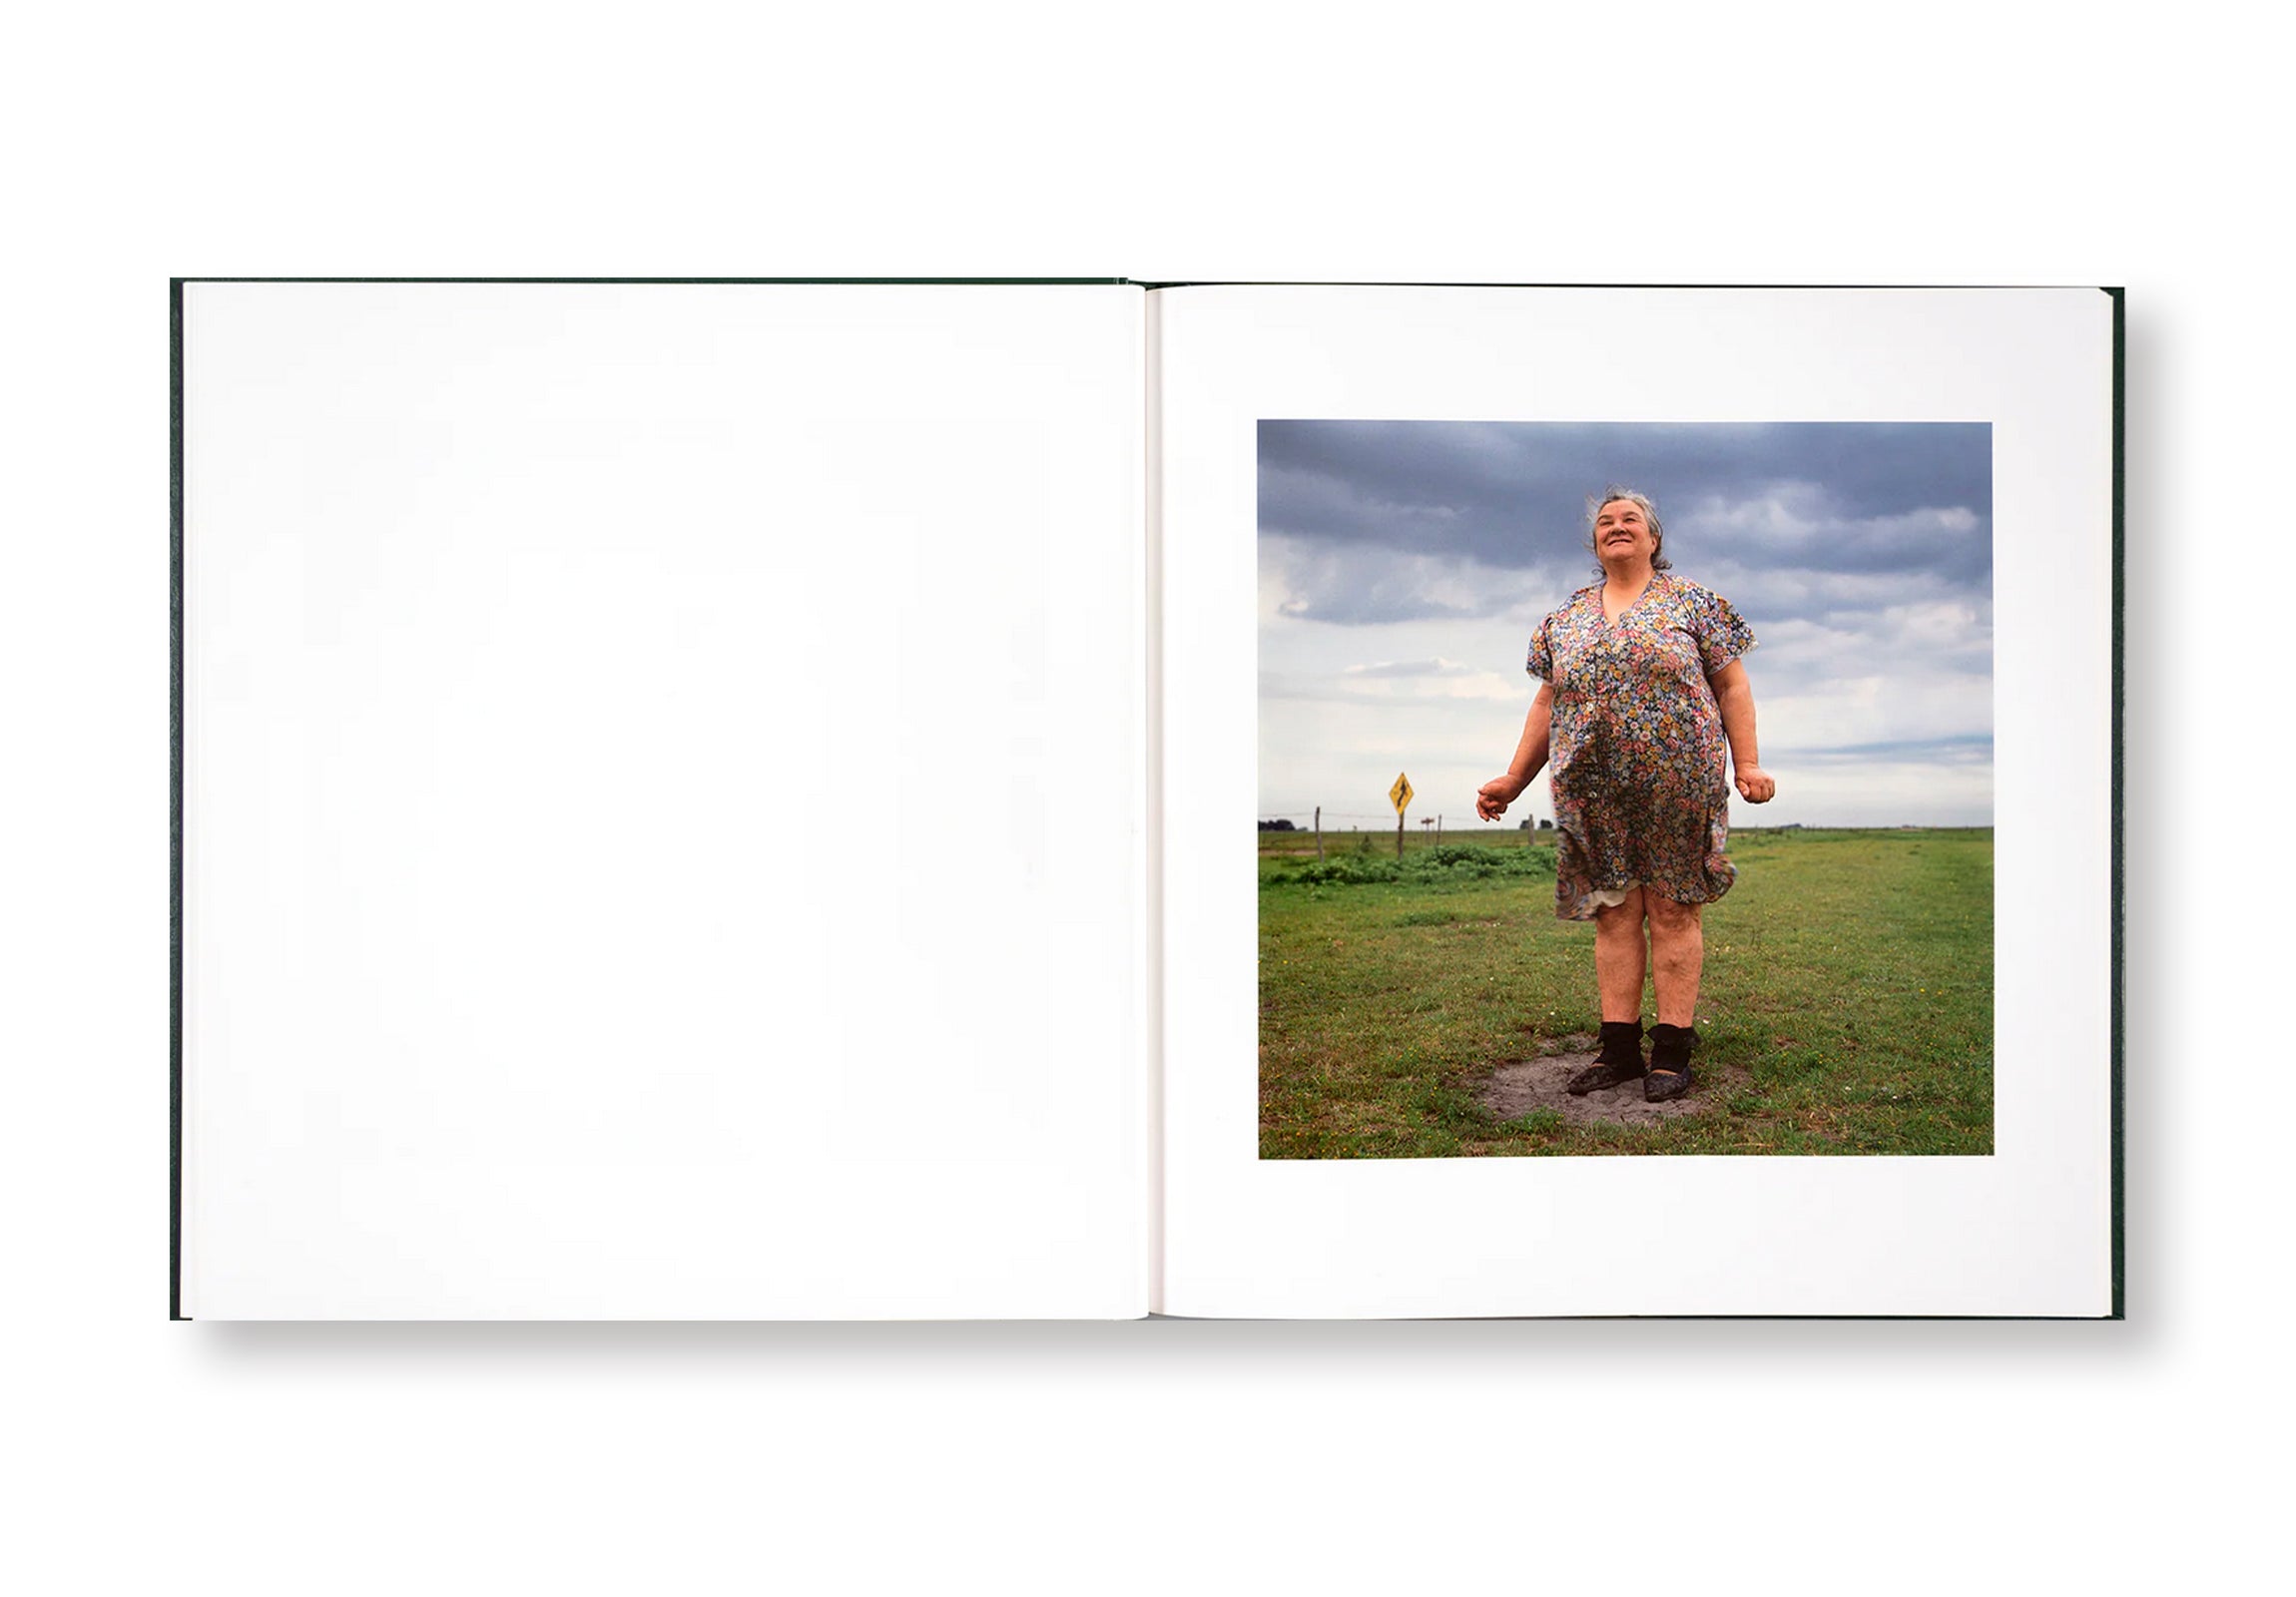 ON THE SIXTH DAY by Alessandra Sanguinetti  [SIGNED]